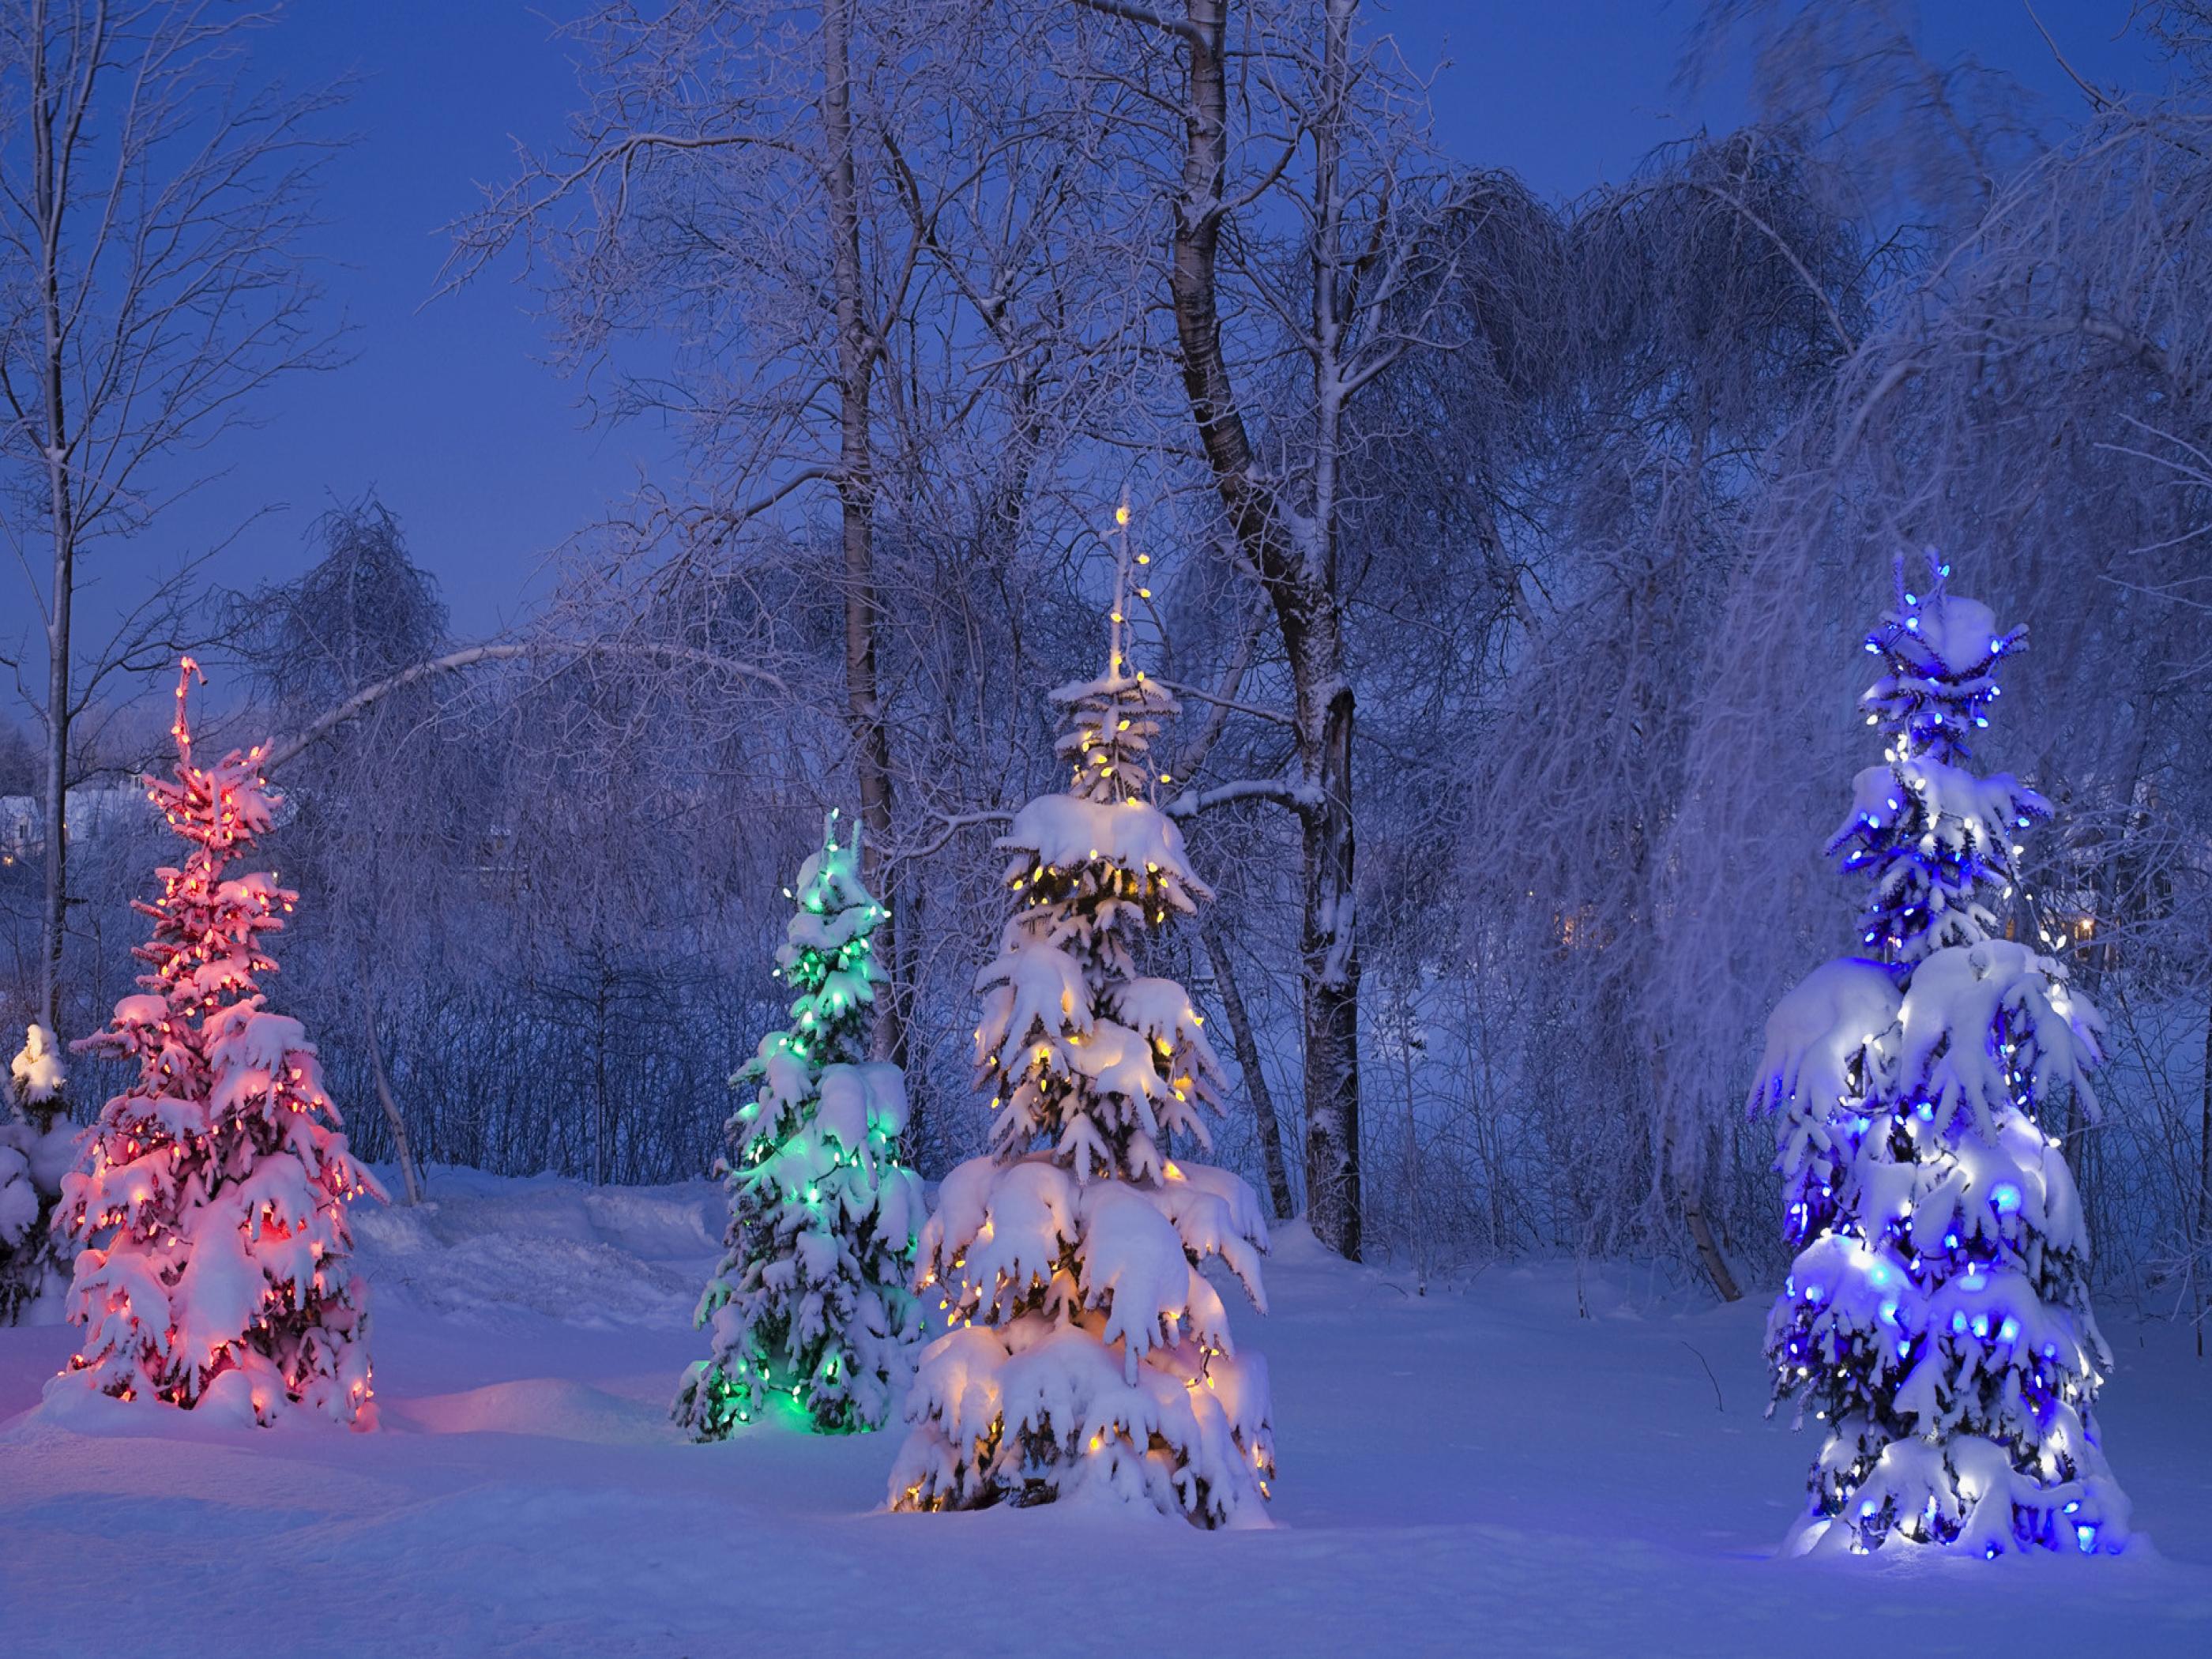 Christmas Live Wallpaper For Computer - Christmas Trees In Canada - HD Wallpaper 